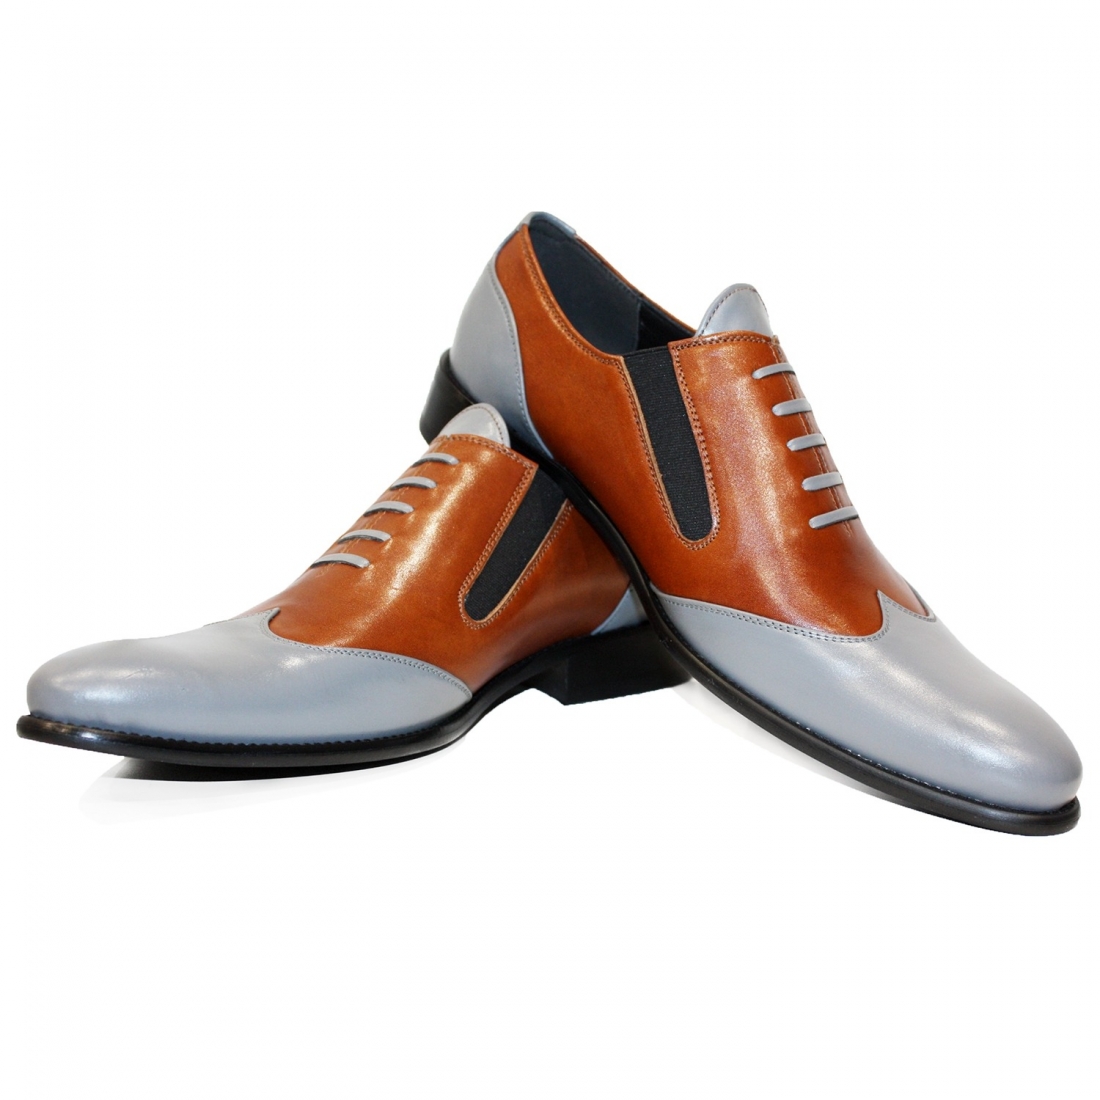 Modello Jabello - Loafers & Slip-Ons - Handmade Colorful Italian Leather Shoes